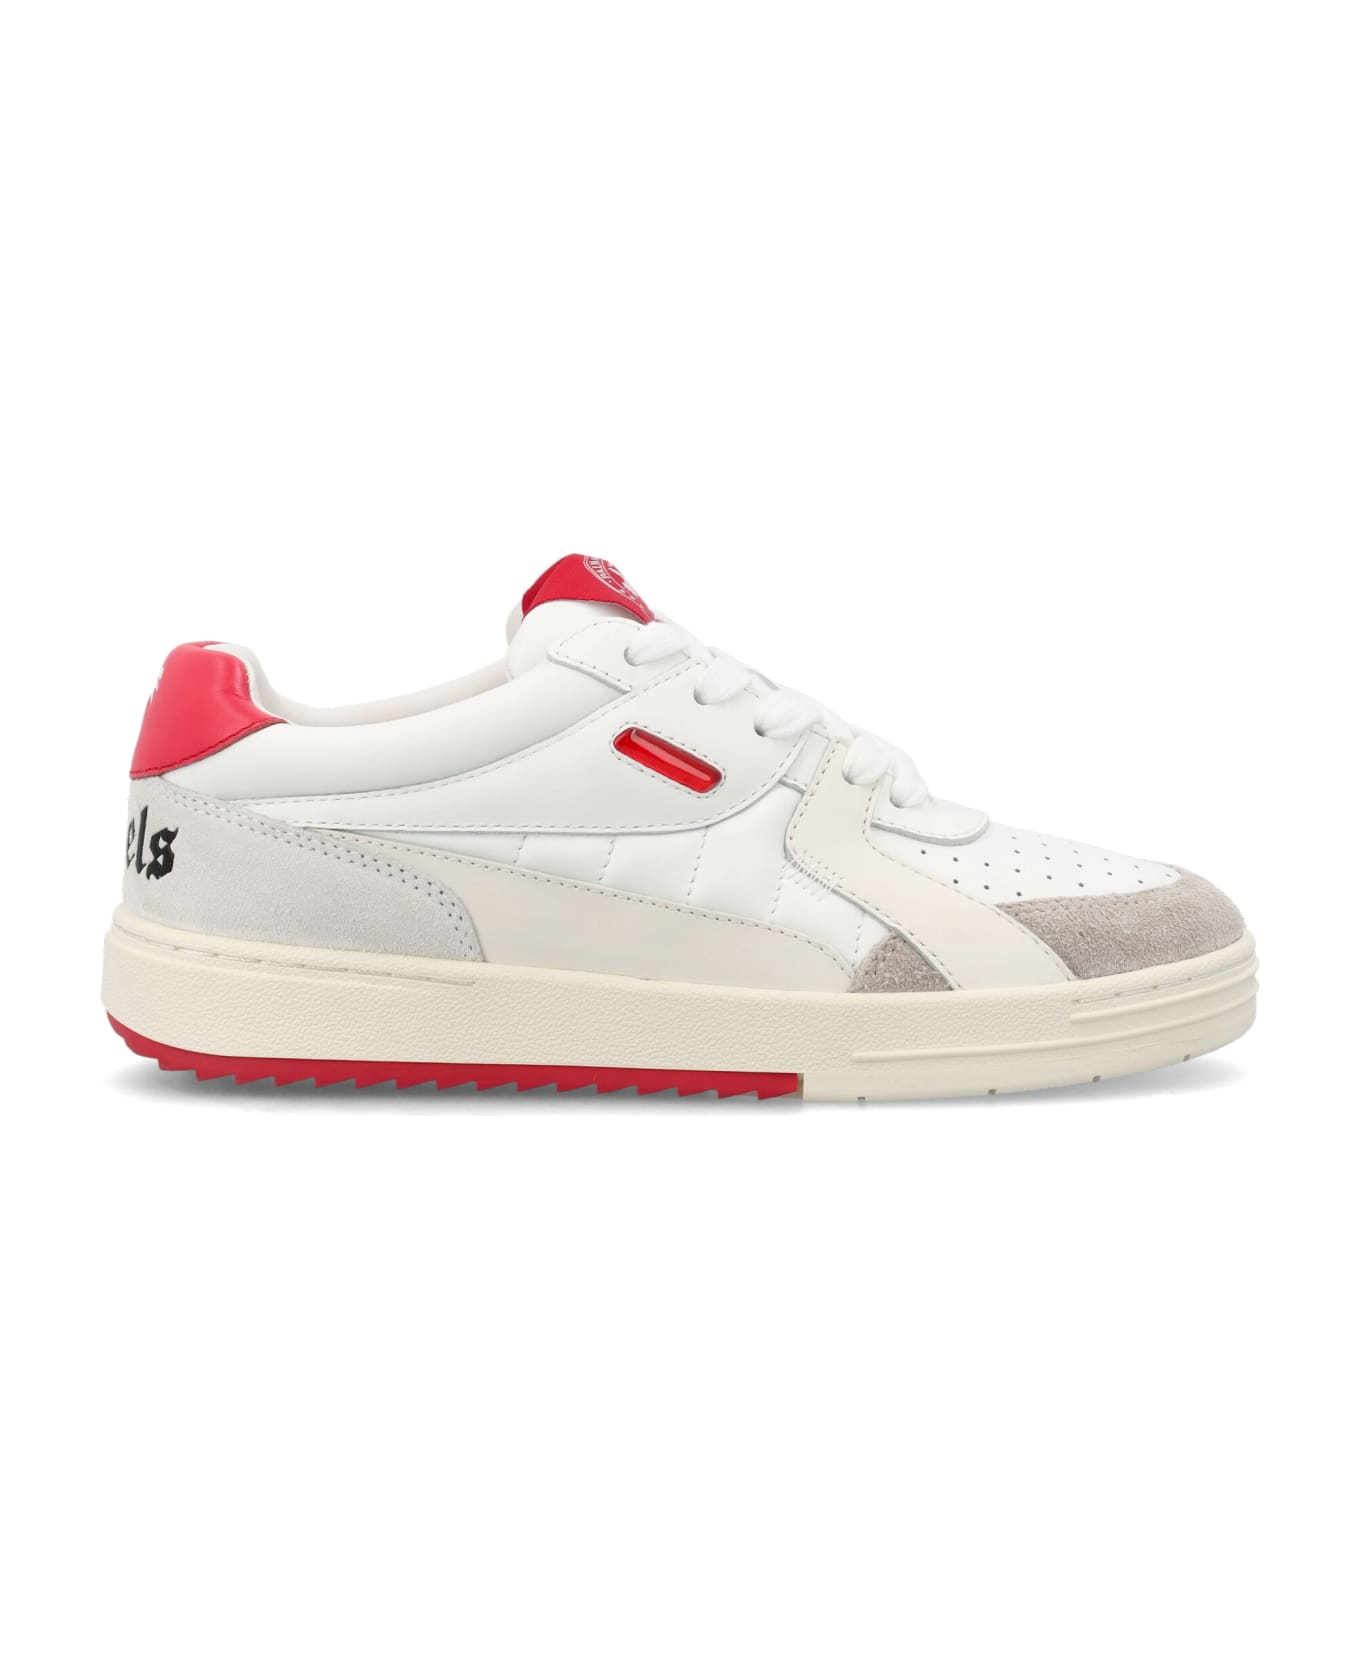 Palm Angels University Sneakers - White